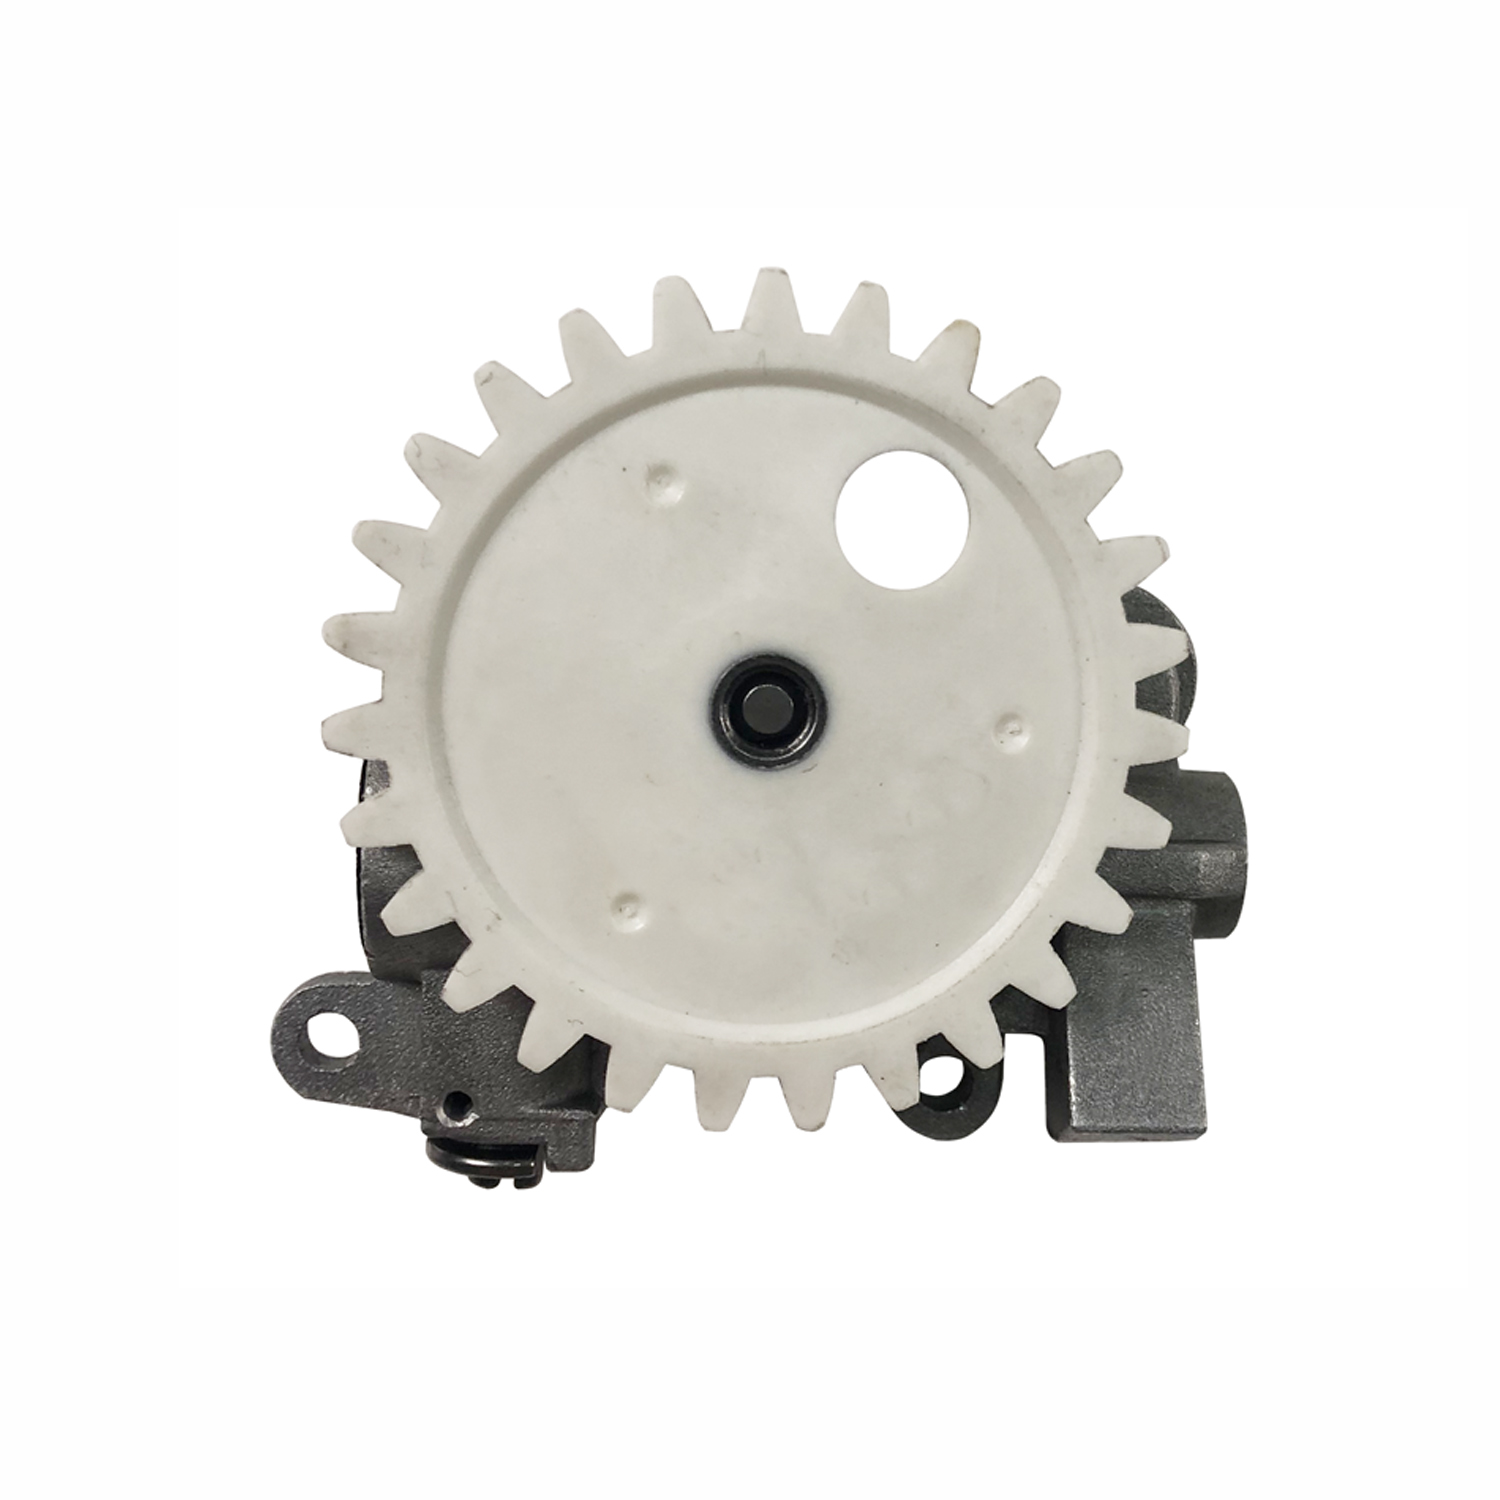 Oil Pump Worm Gear Cover For OEM 1124 021 1100 STIHL 088 MS880 Chainsaw 